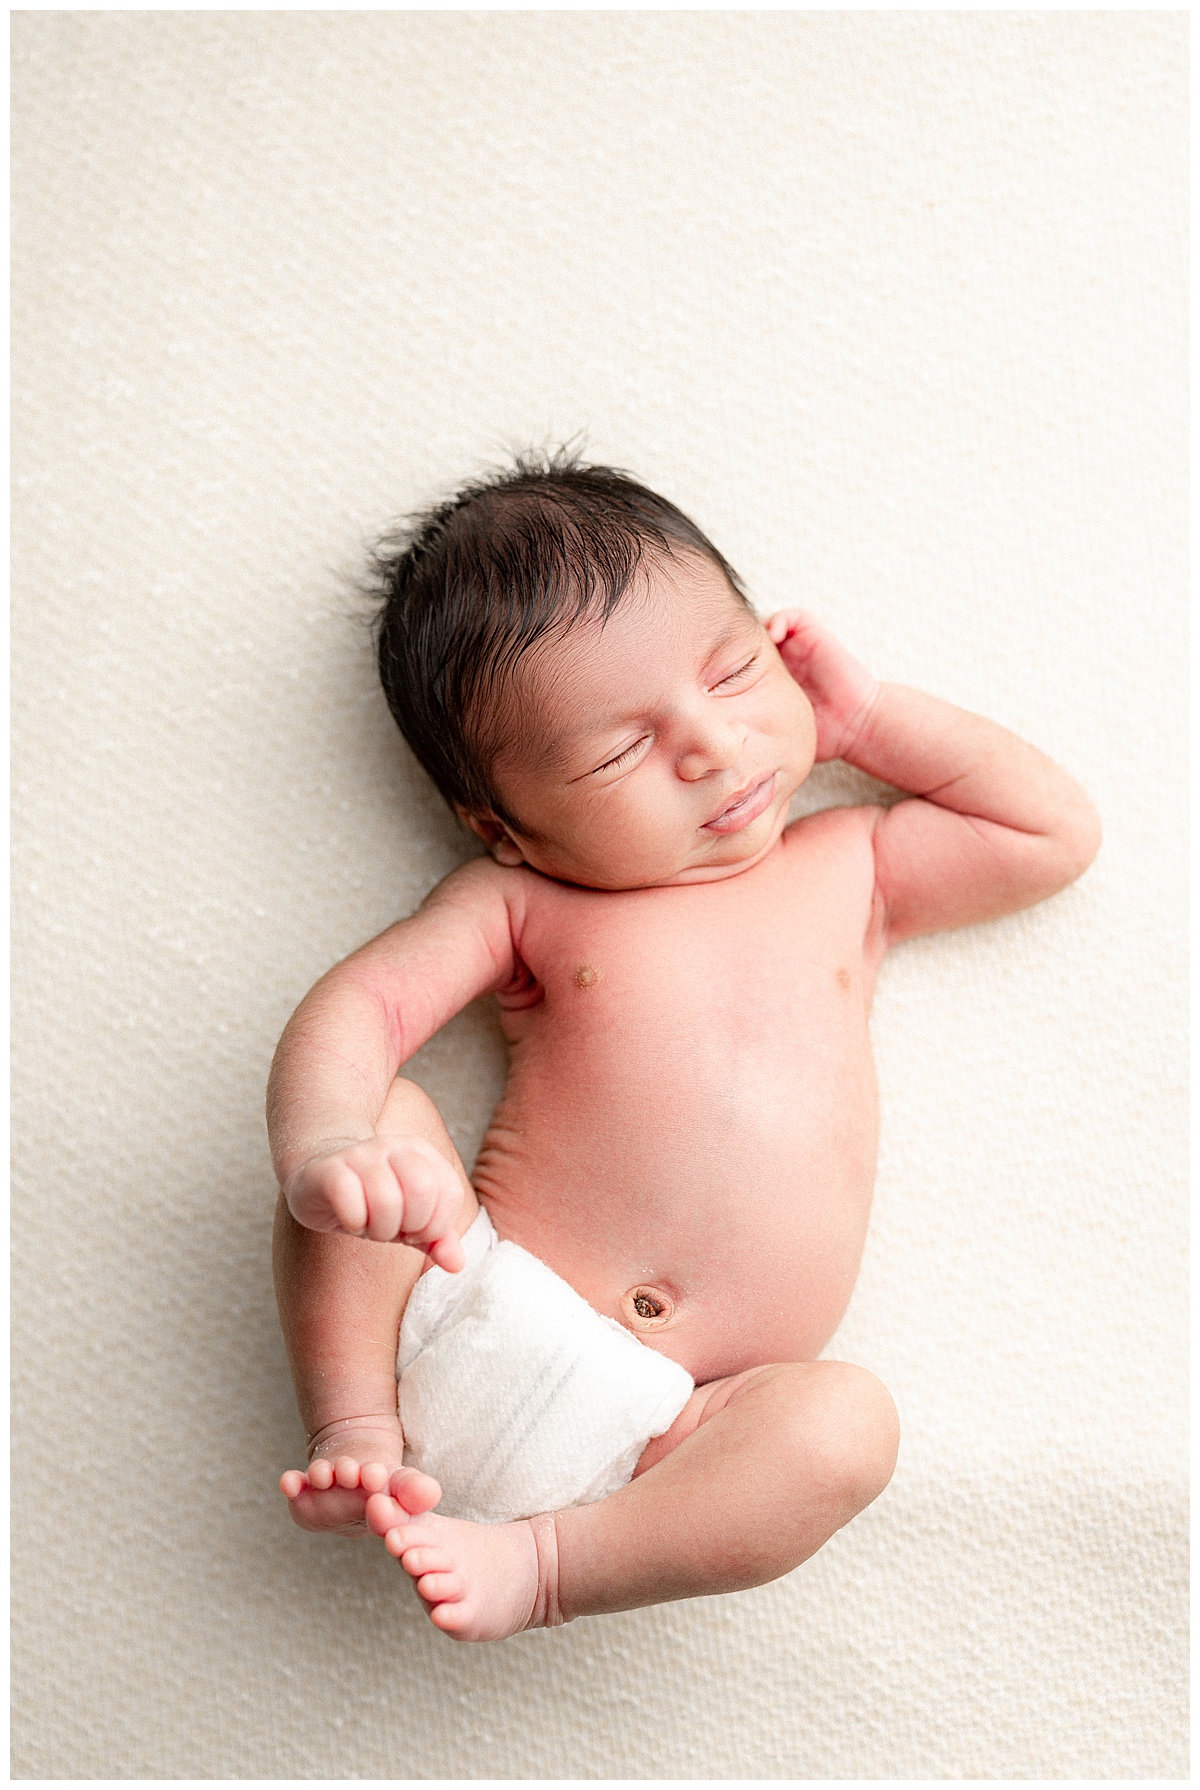 Baby stretches for Norma Fayak Photography